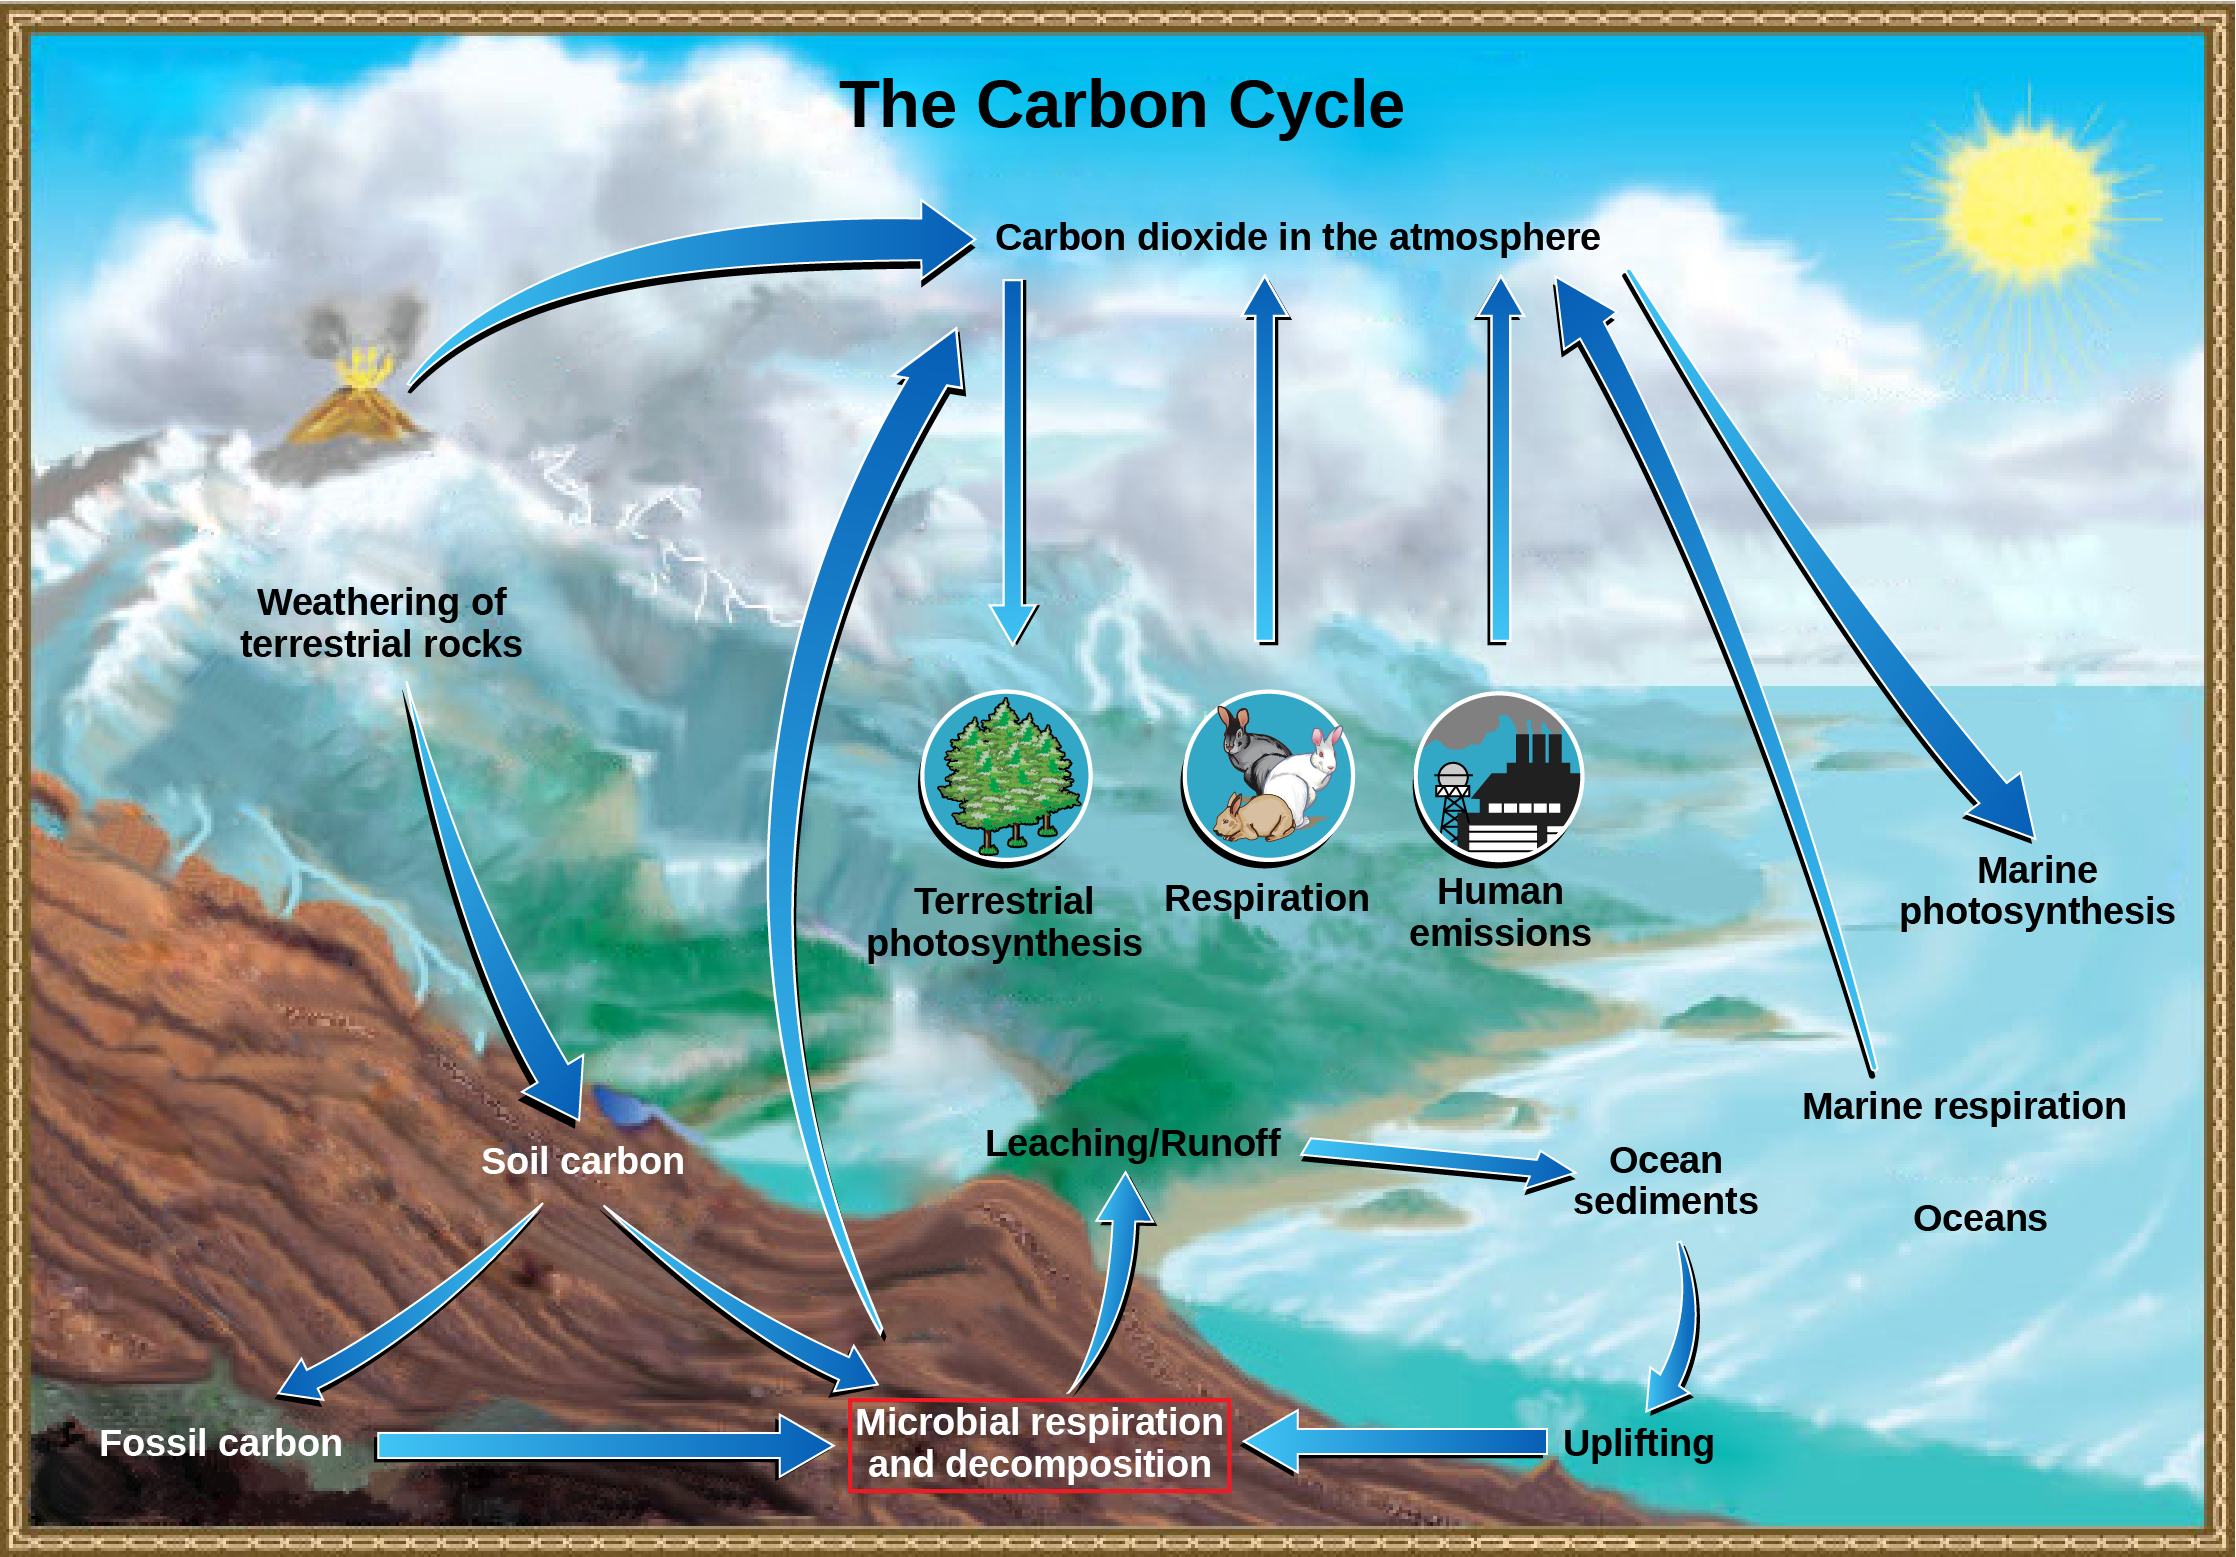 This illustration shows the role of bacteria in the carbon cycle. Bacteria break down organic carbon, which is released as carbon dioxide into the atmosphere.